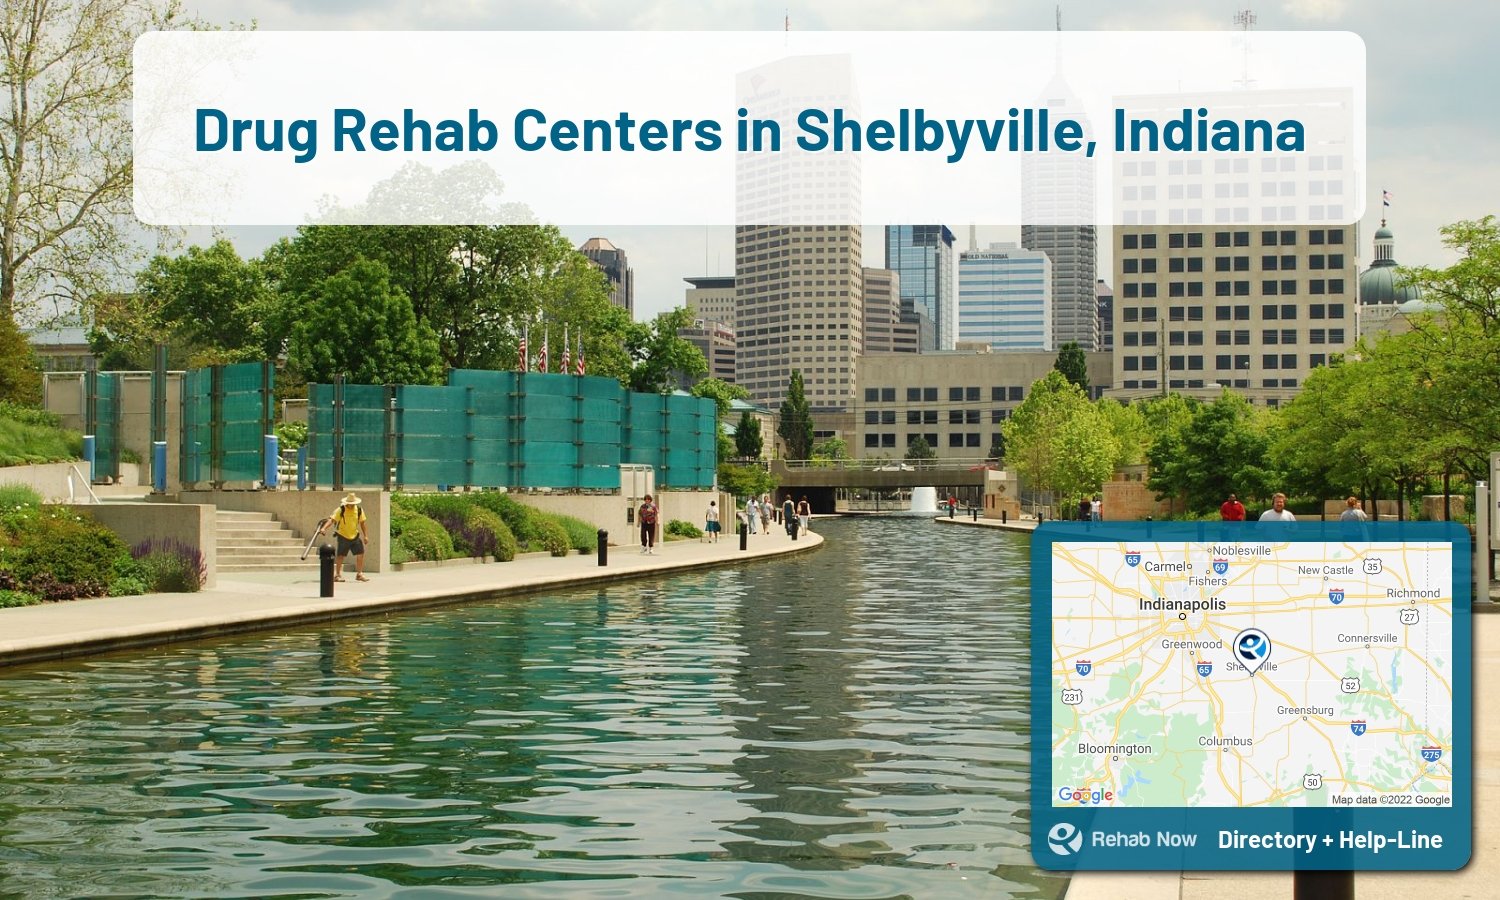 Shelbyville, IN Treatment Centers. Find drug rehab in Shelbyville, Indiana, or detox and treatment programs. Get the right help now!